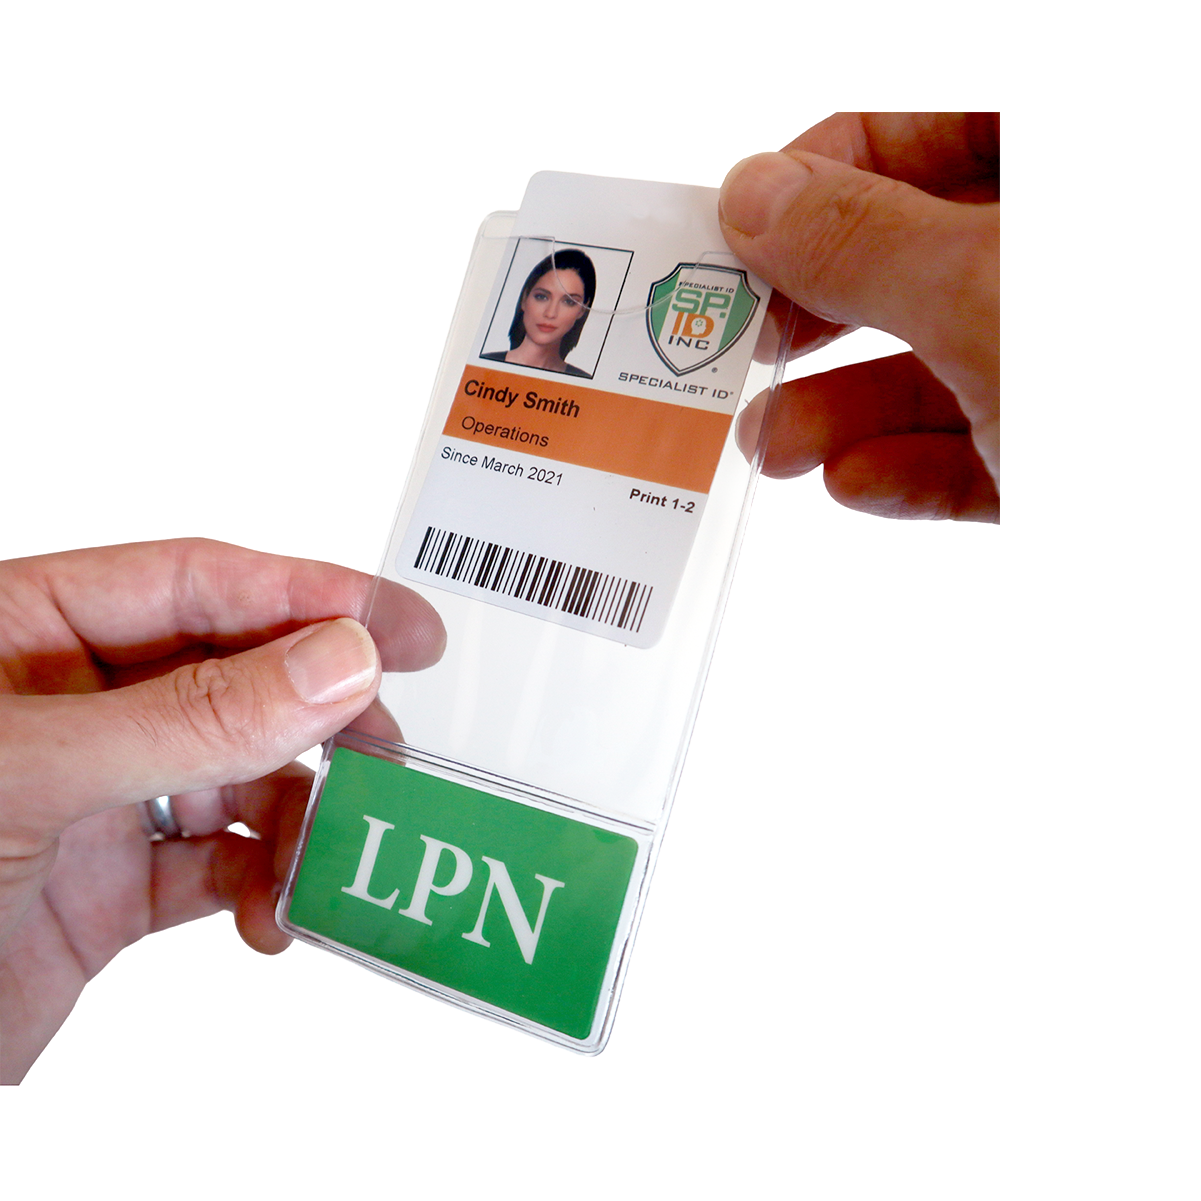 LPN BadgeBottom Badge Holder & Badge Buddy IN ONE!! - Vertical ID Badge Sleeve with Bottom Role Tag for Nurses